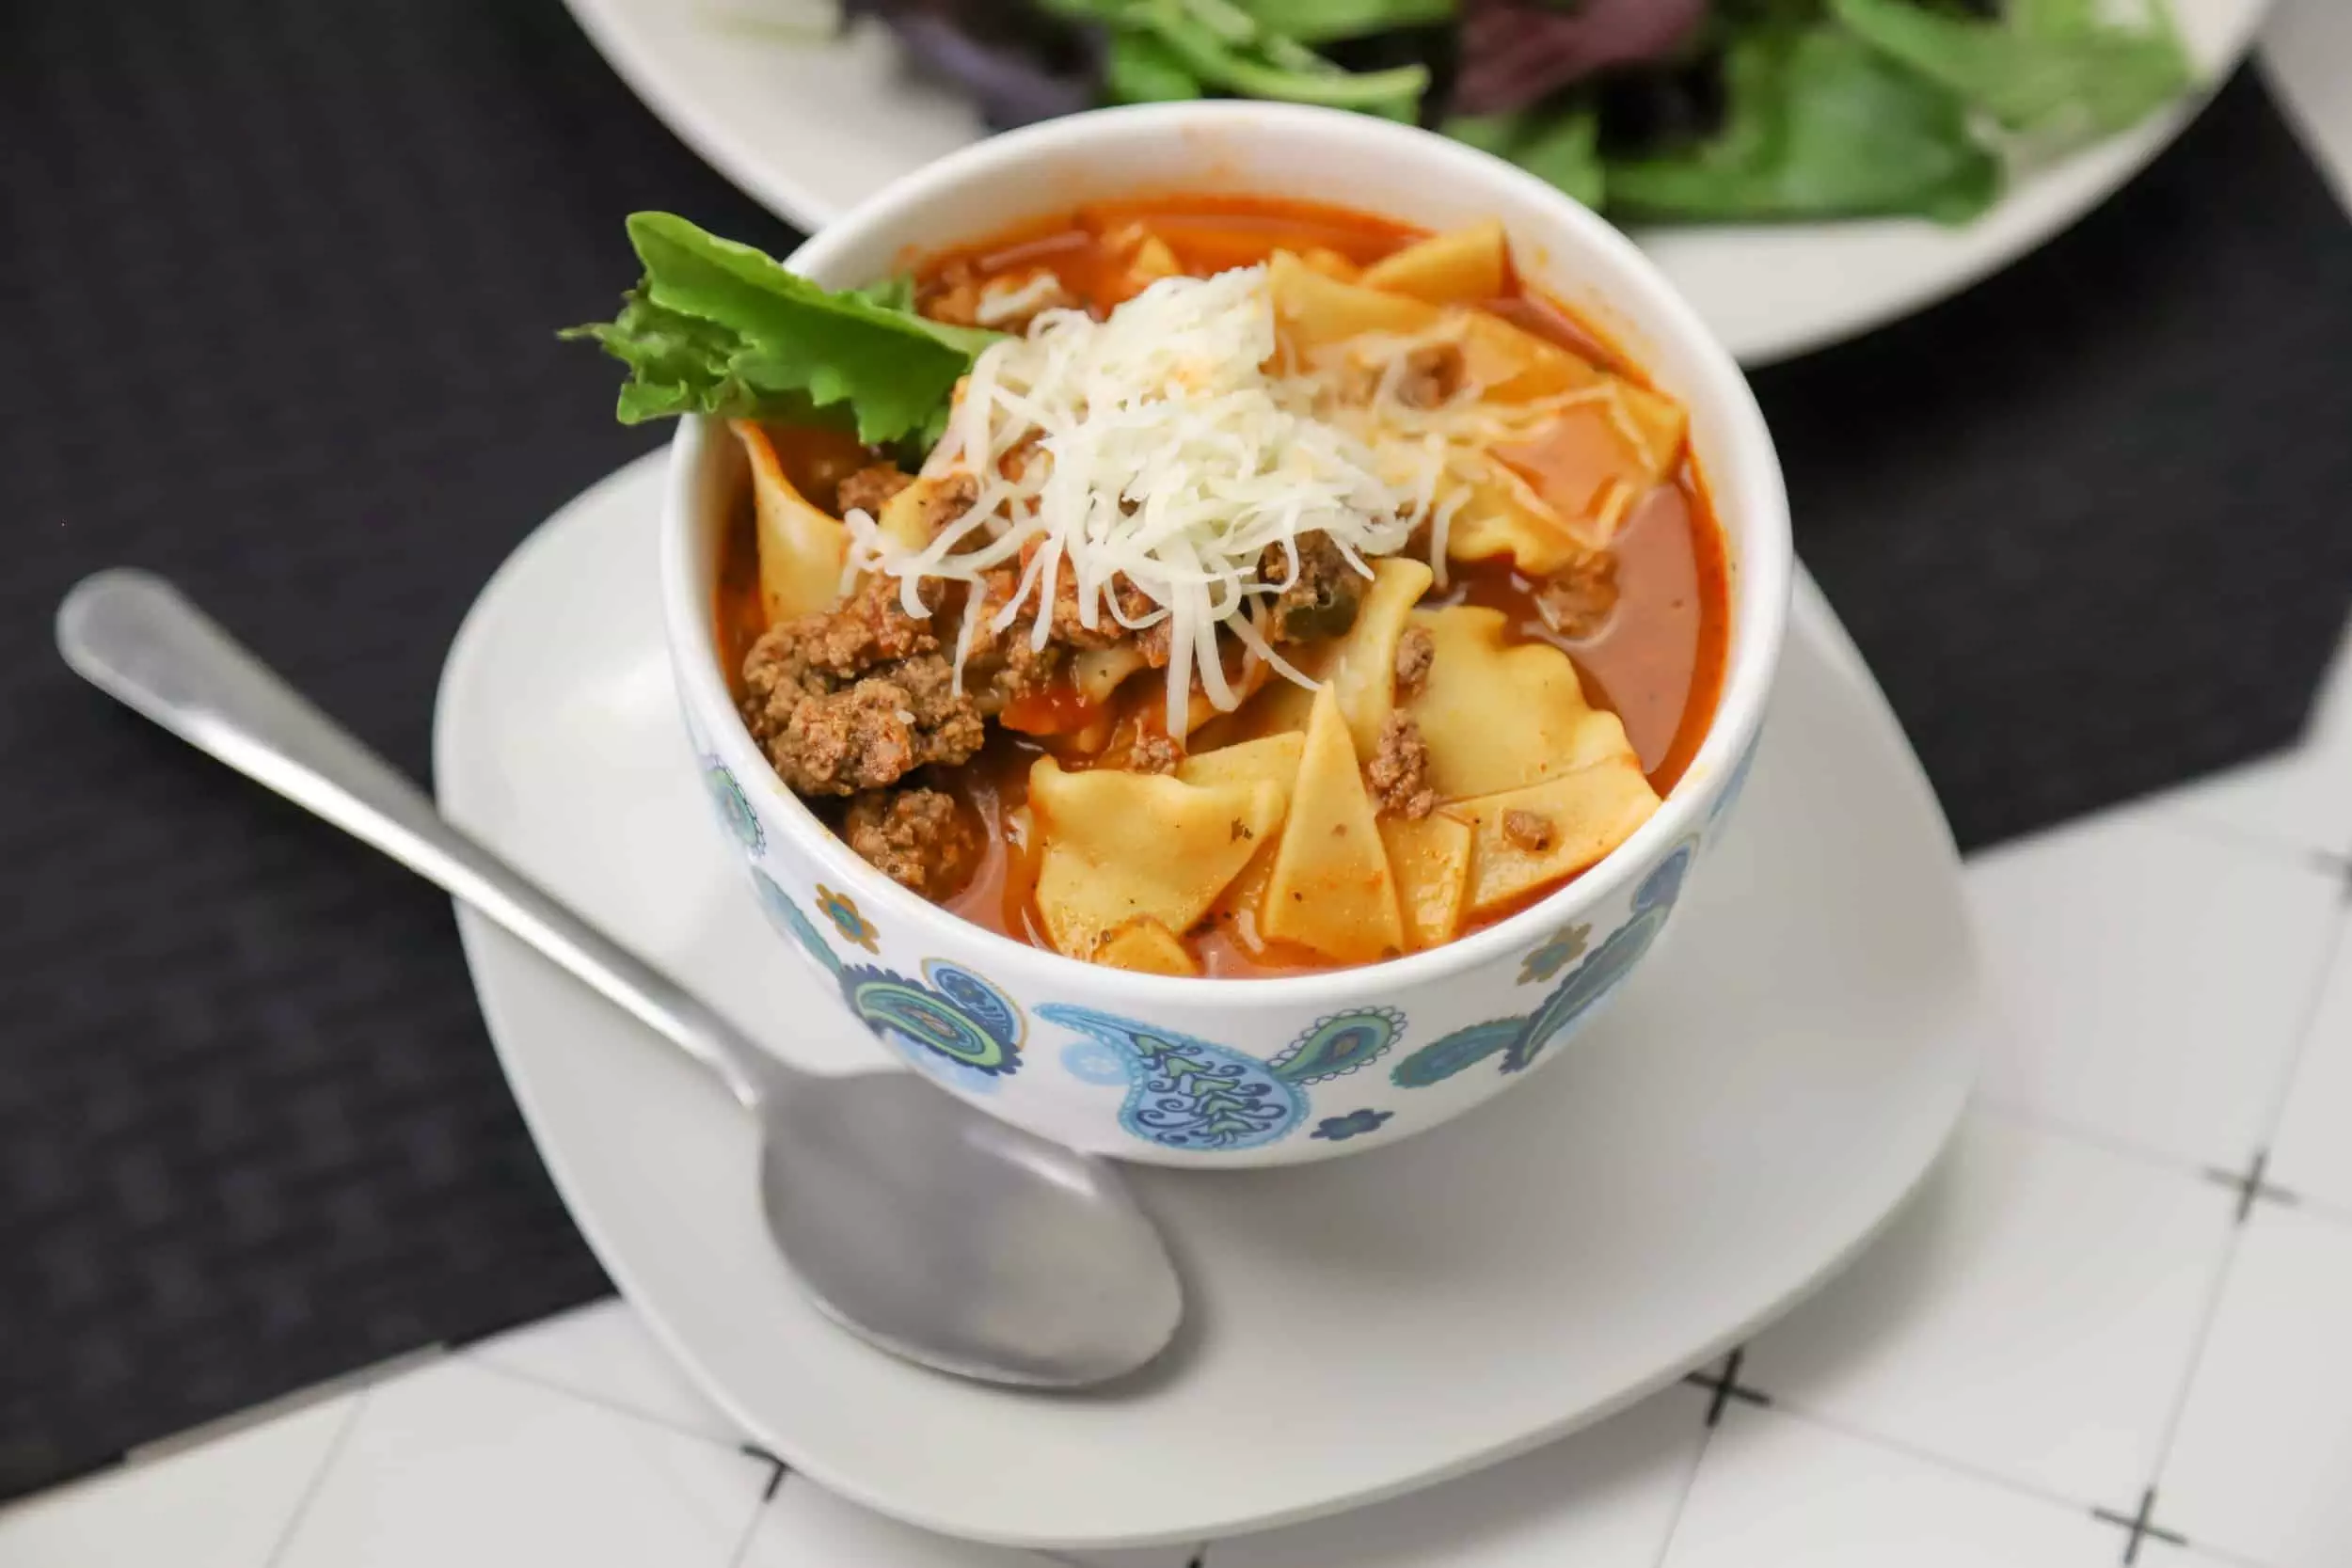 Instant pot lasagna soup in a bowl with a spoon and a side salad